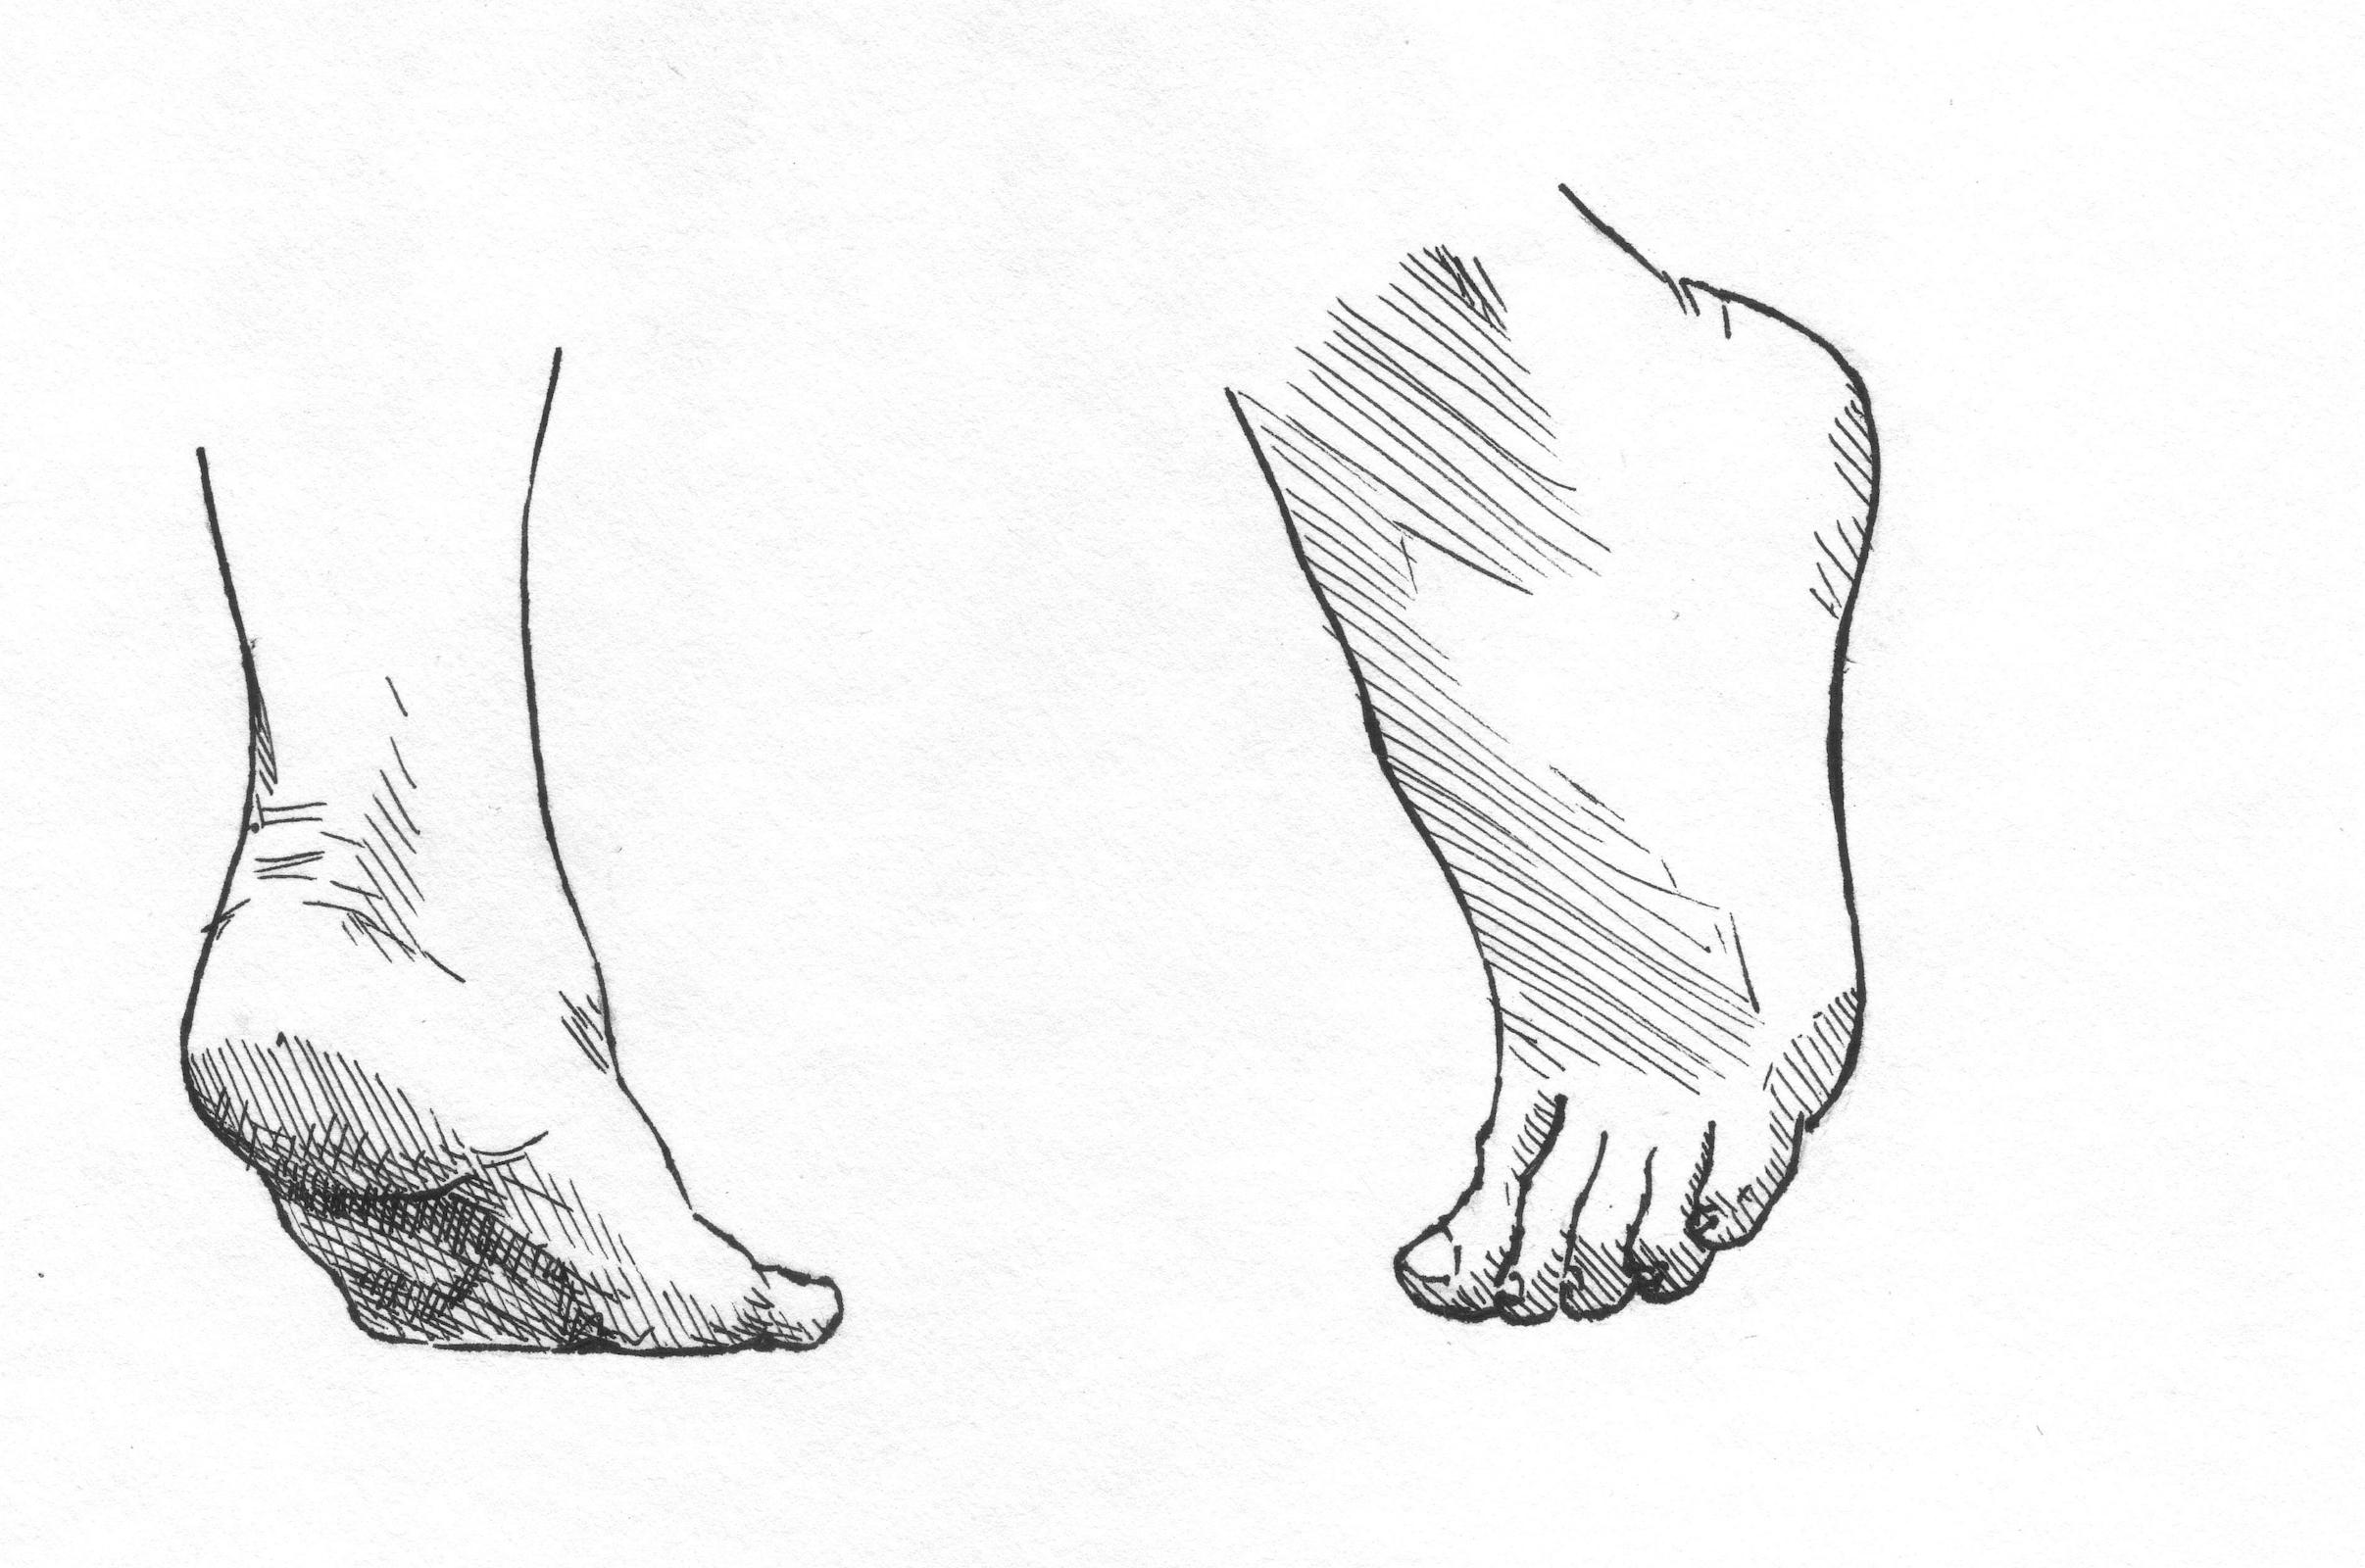 How to Sketch People book example - Sketches of feet